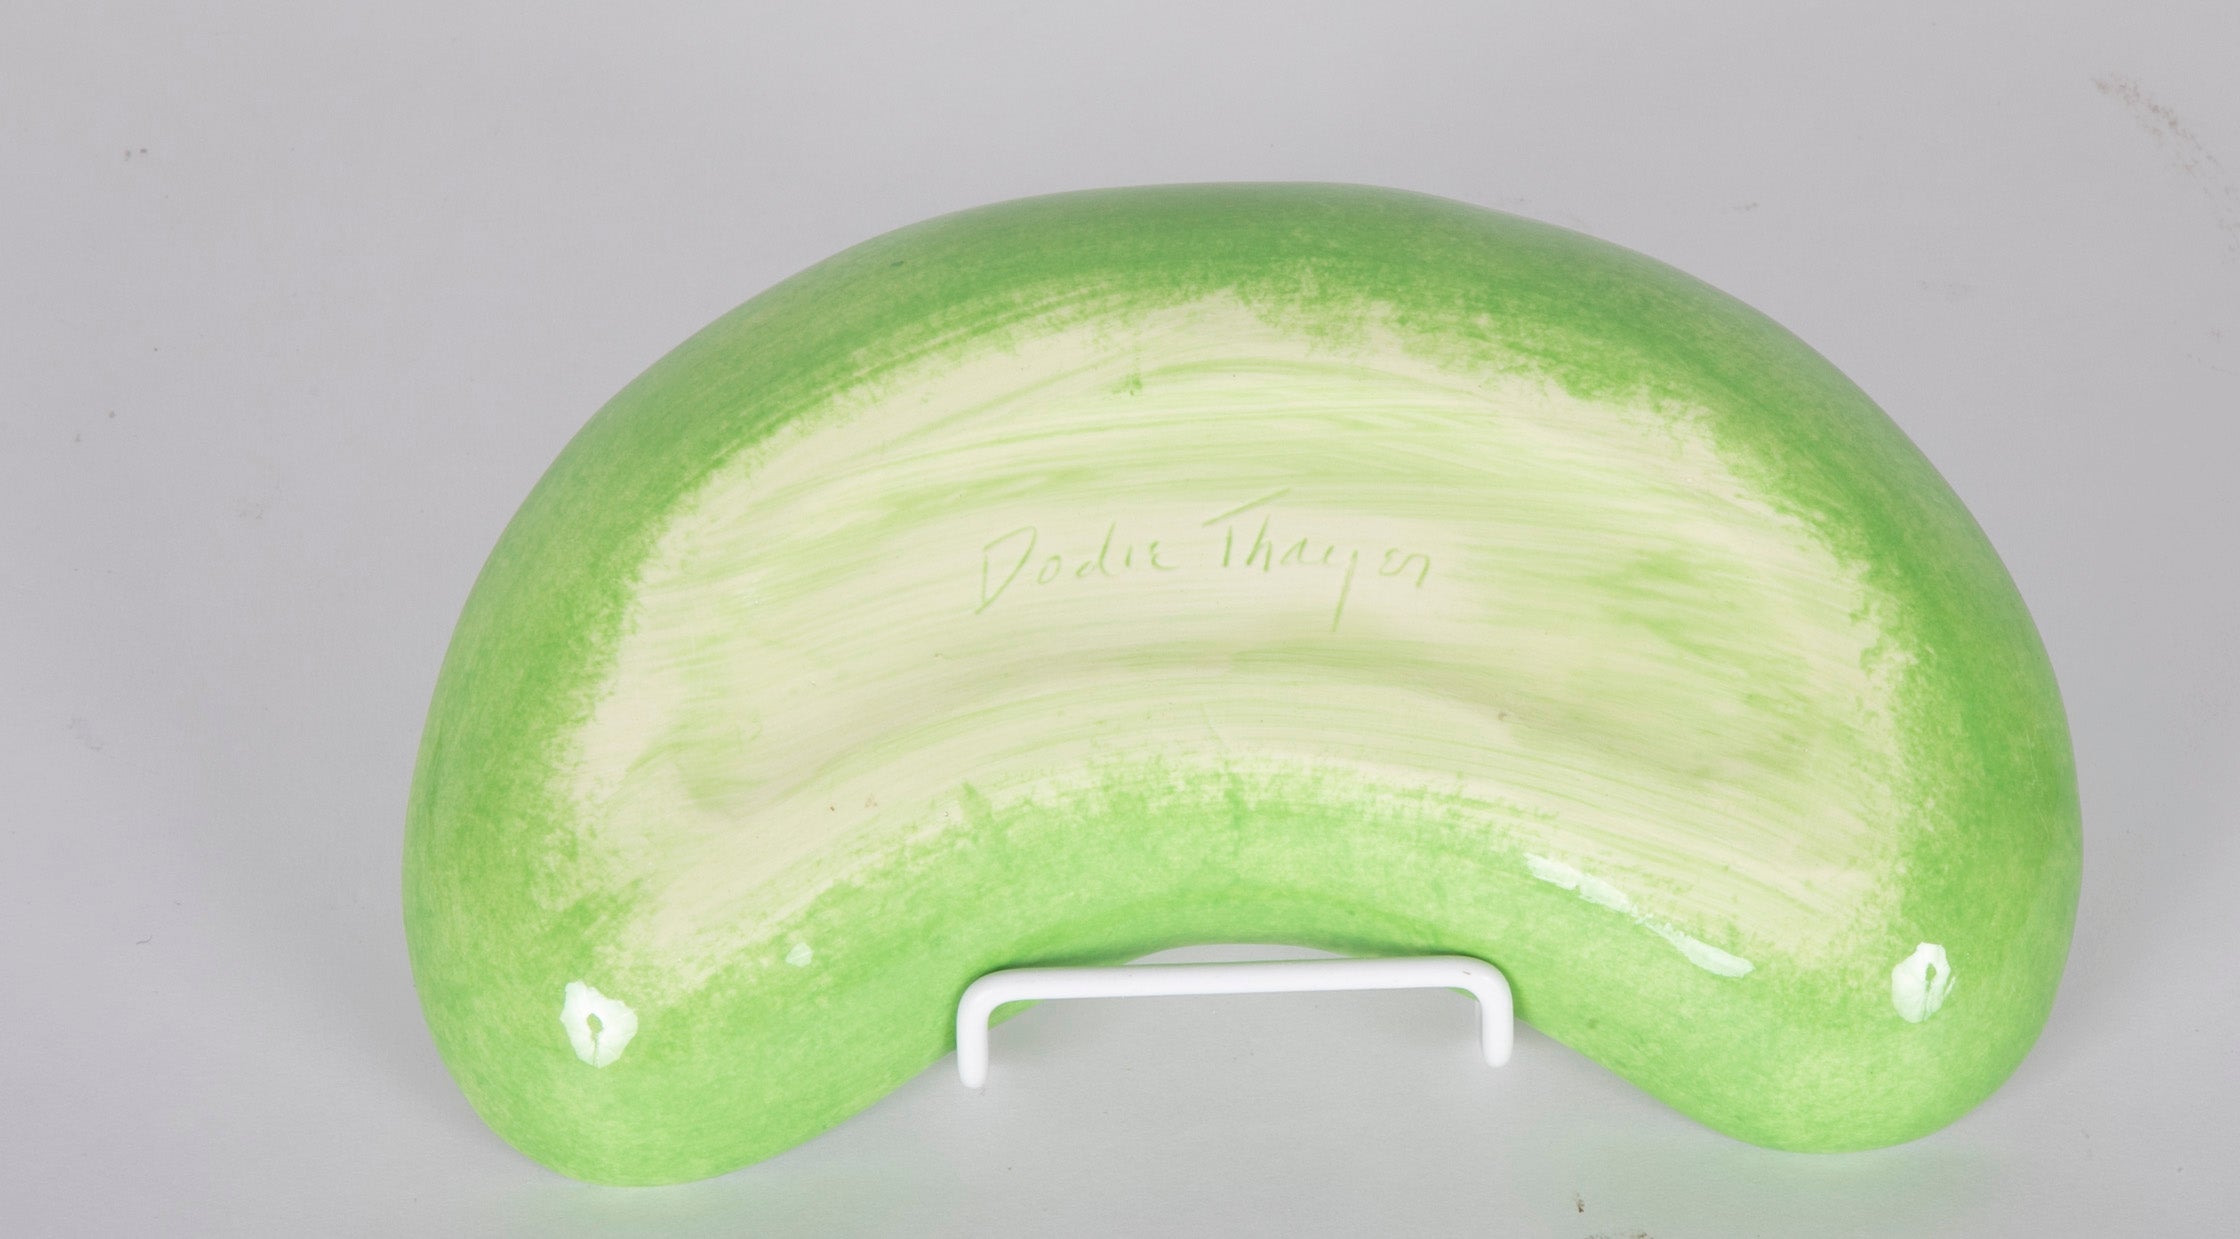 Dodie Thayer Lettuce Ware Kidney Shaped Dish